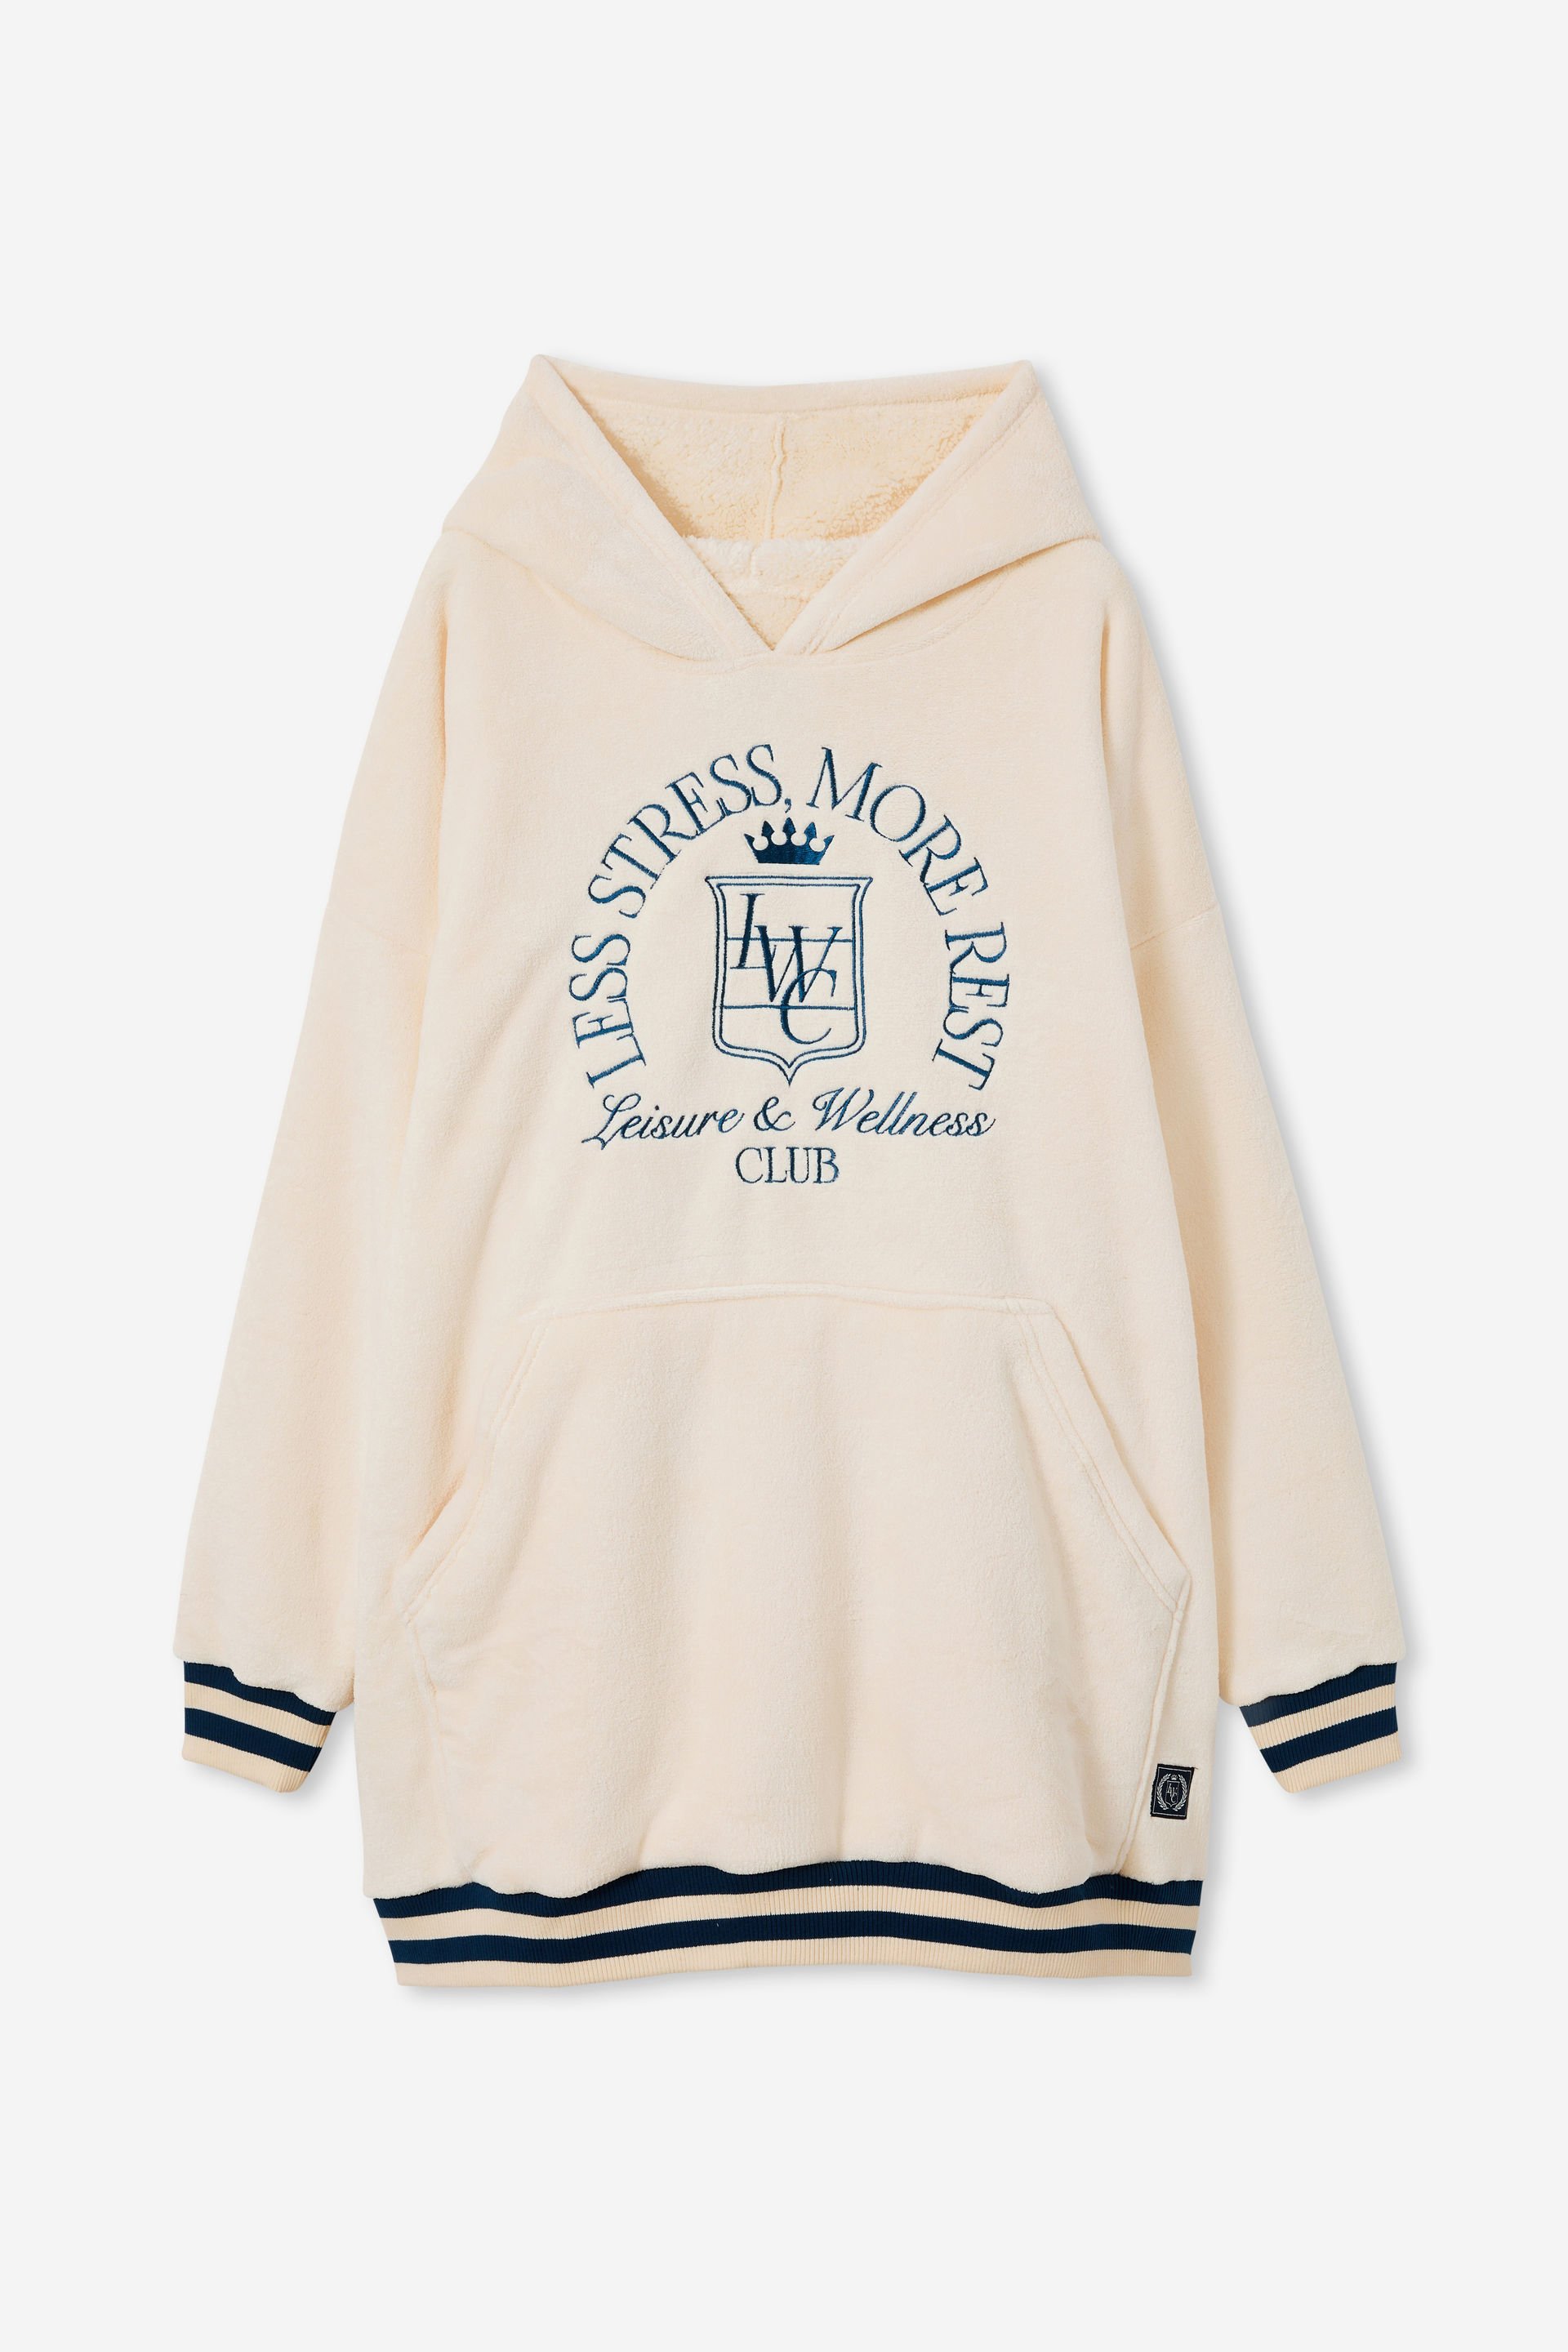 Typo - Slounge Around Oversized Hoodie - Less stress more rest club